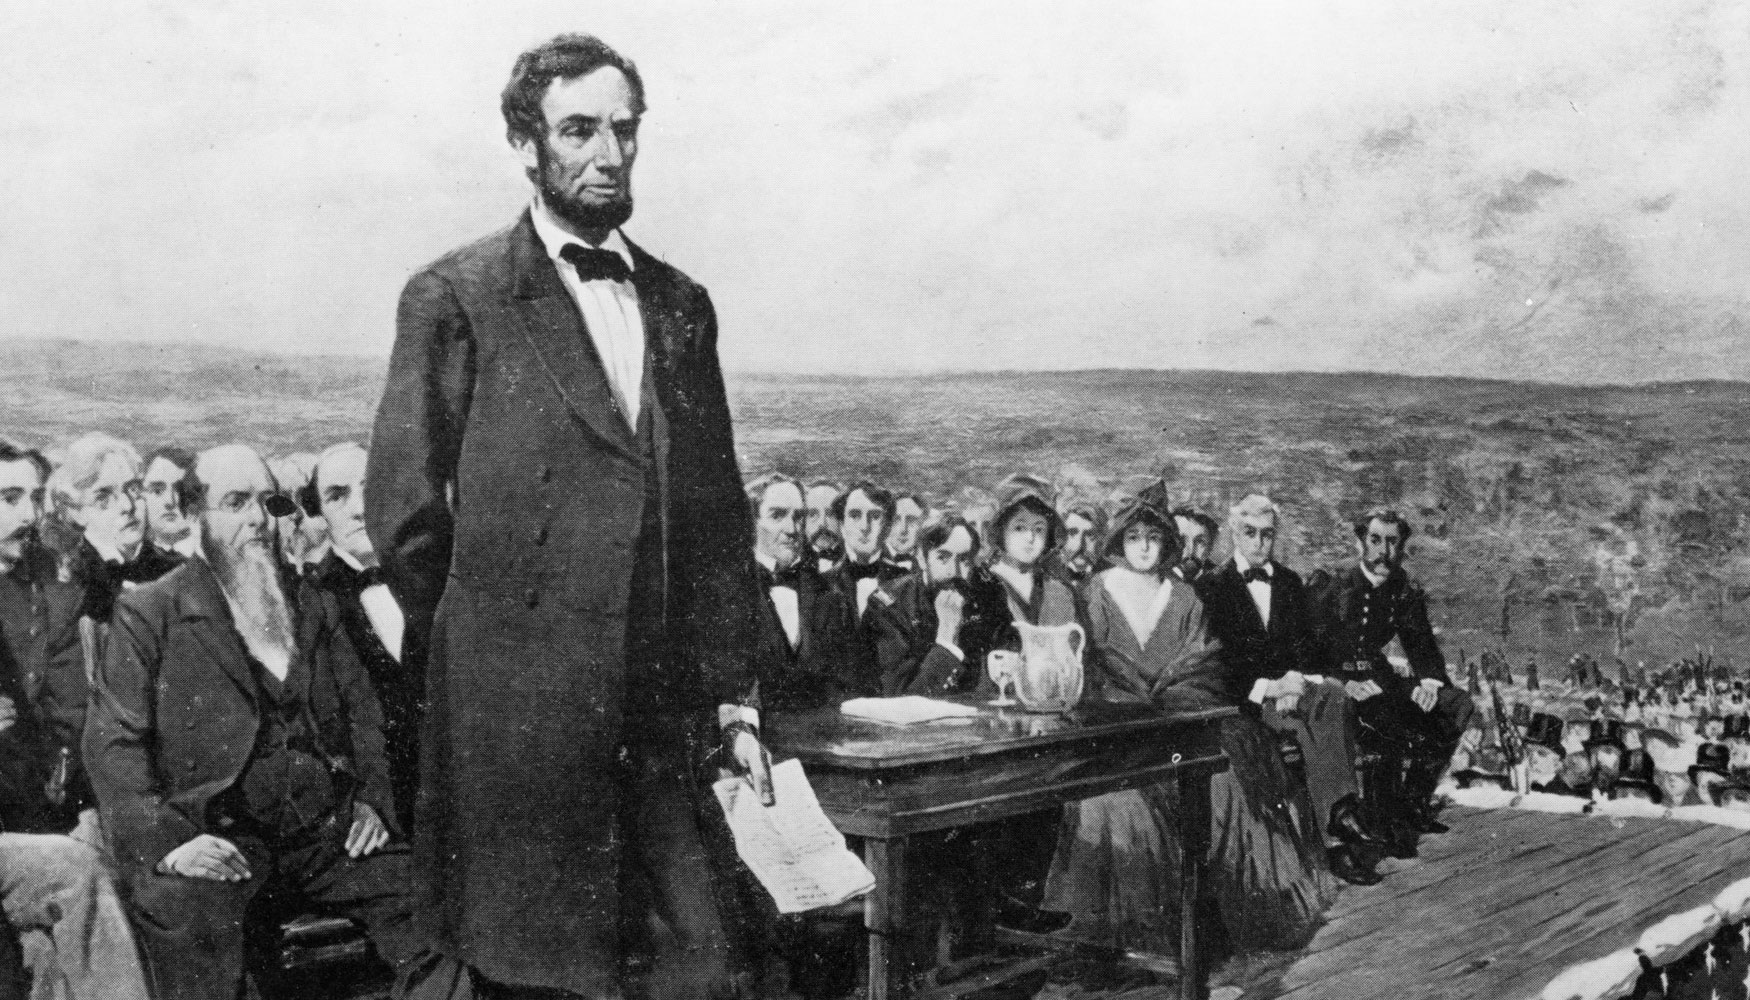 No American Has Got a Perfect Score on This Quiz Without Cheating The Gettysburg Address